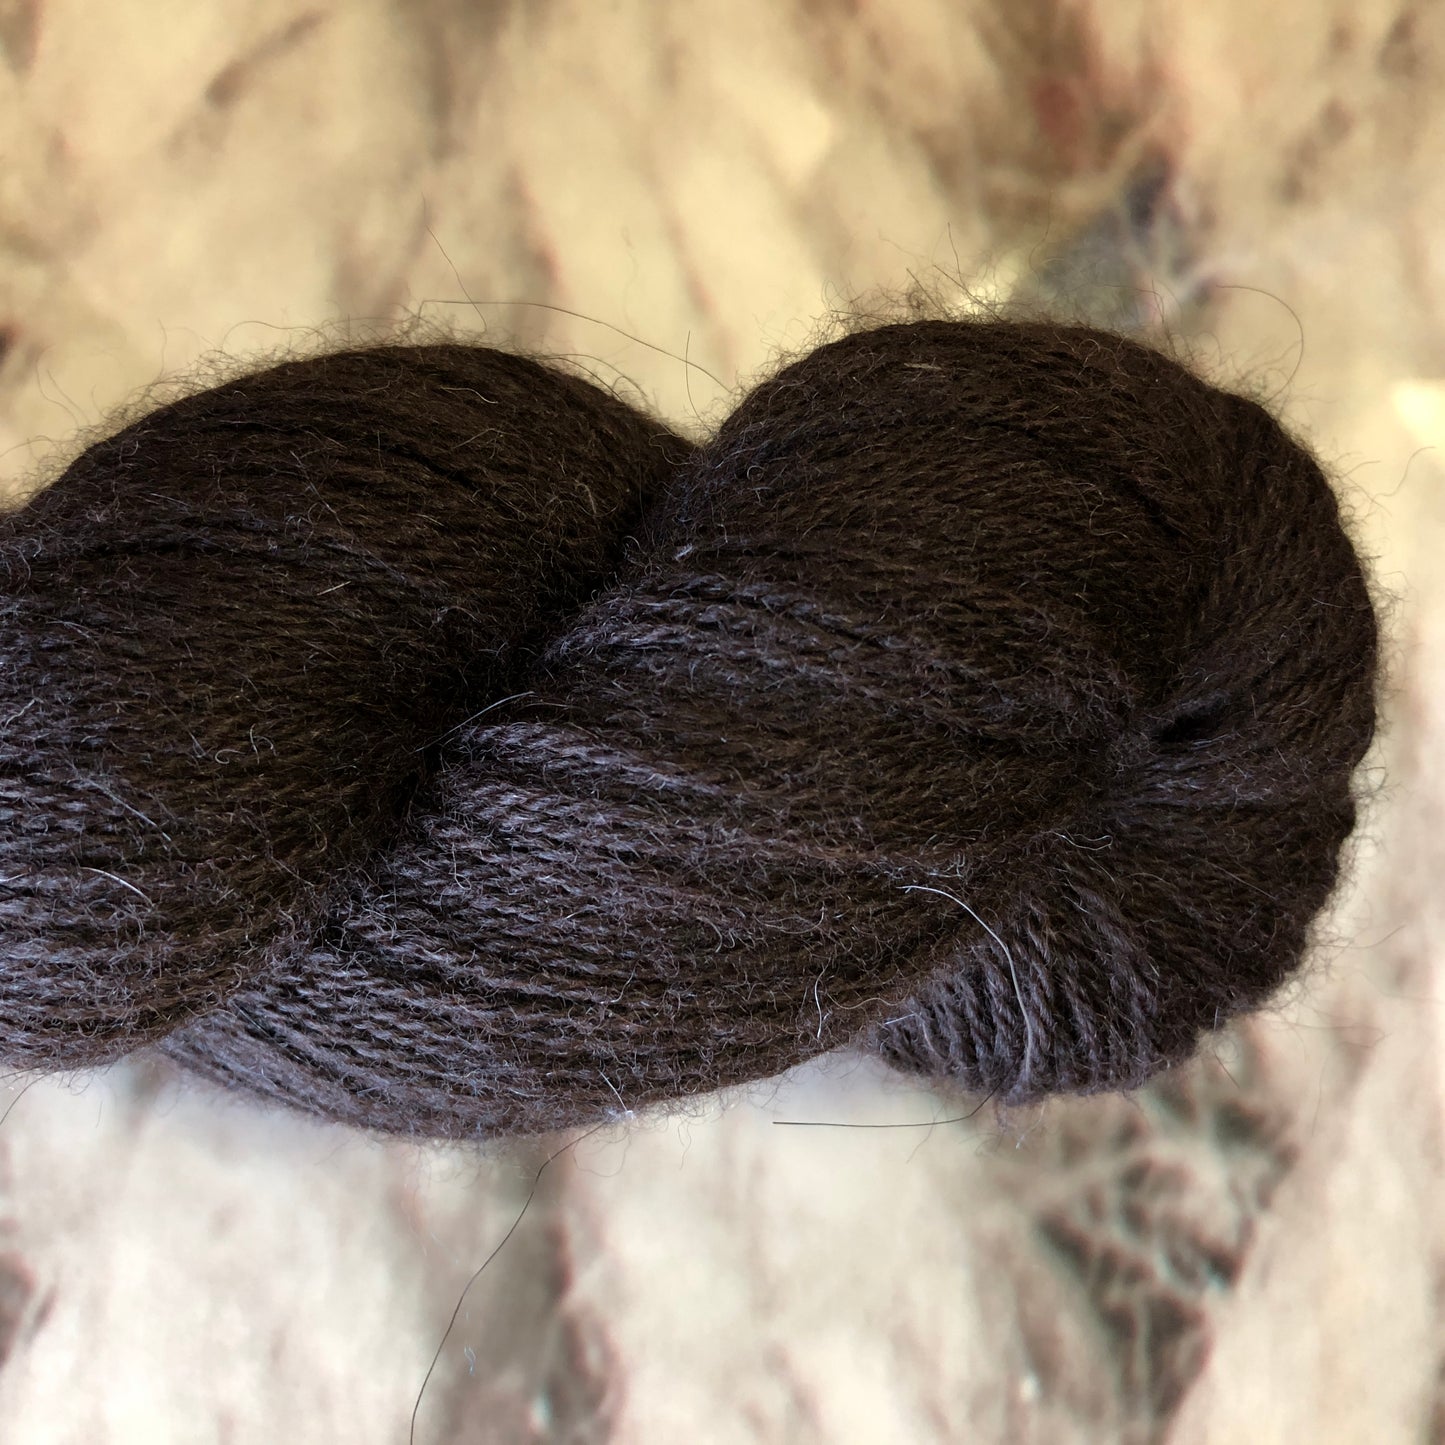 Queensland Collection Llama Lace (discontinued)